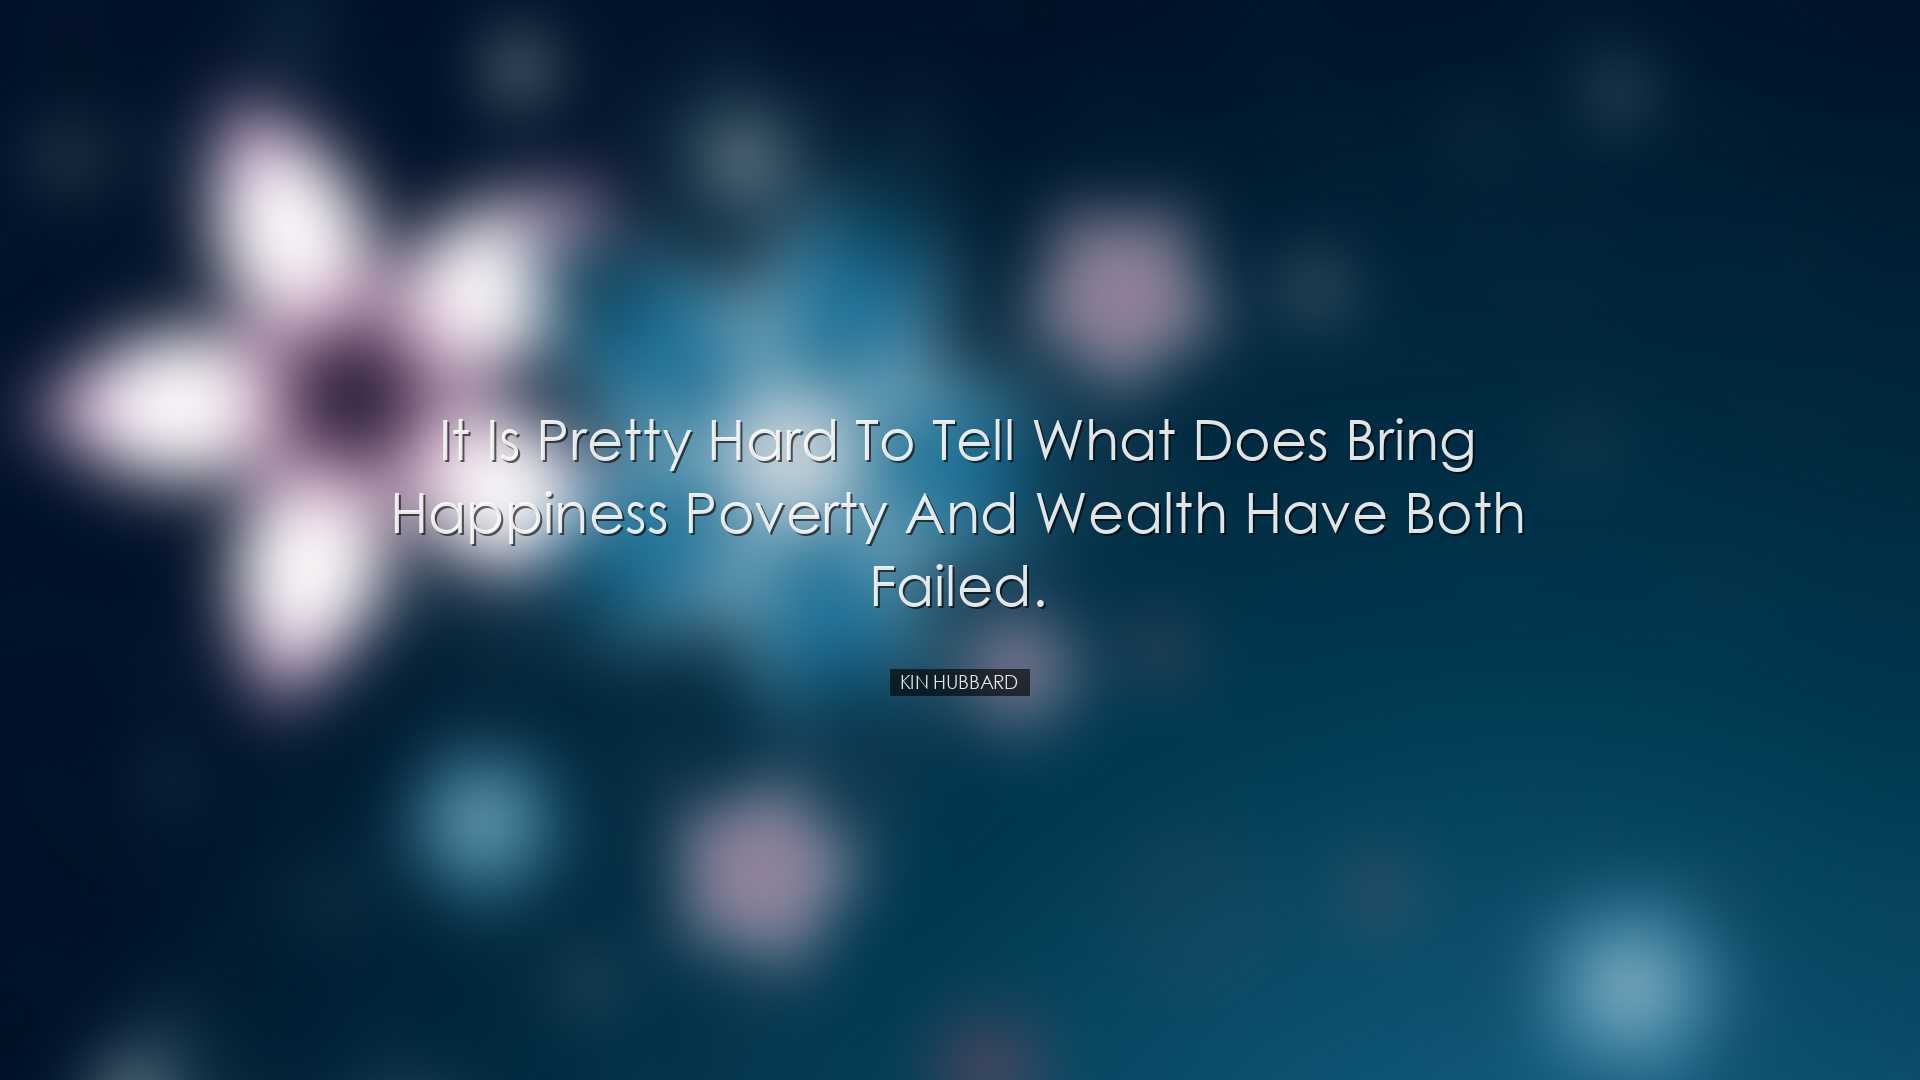 It is pretty hard to tell what does bring happiness poverty and we